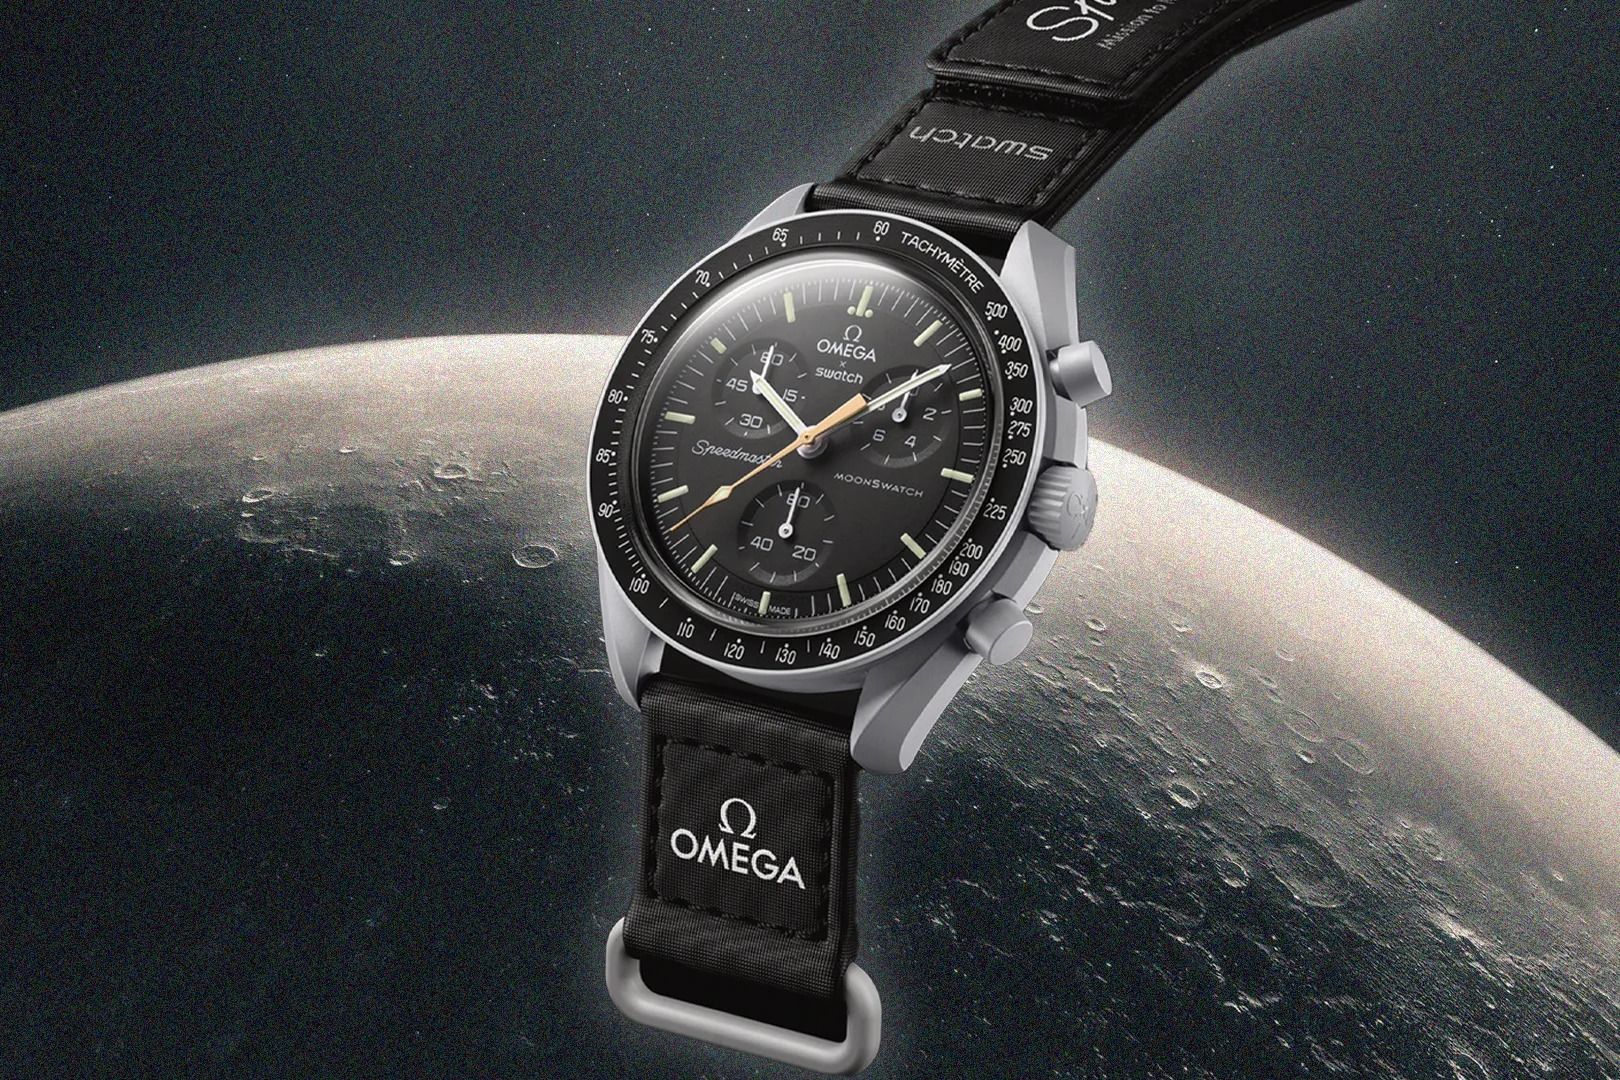 OMEGA × Swatch「Mission to the Moon」が到着｜エスクァイア日本版